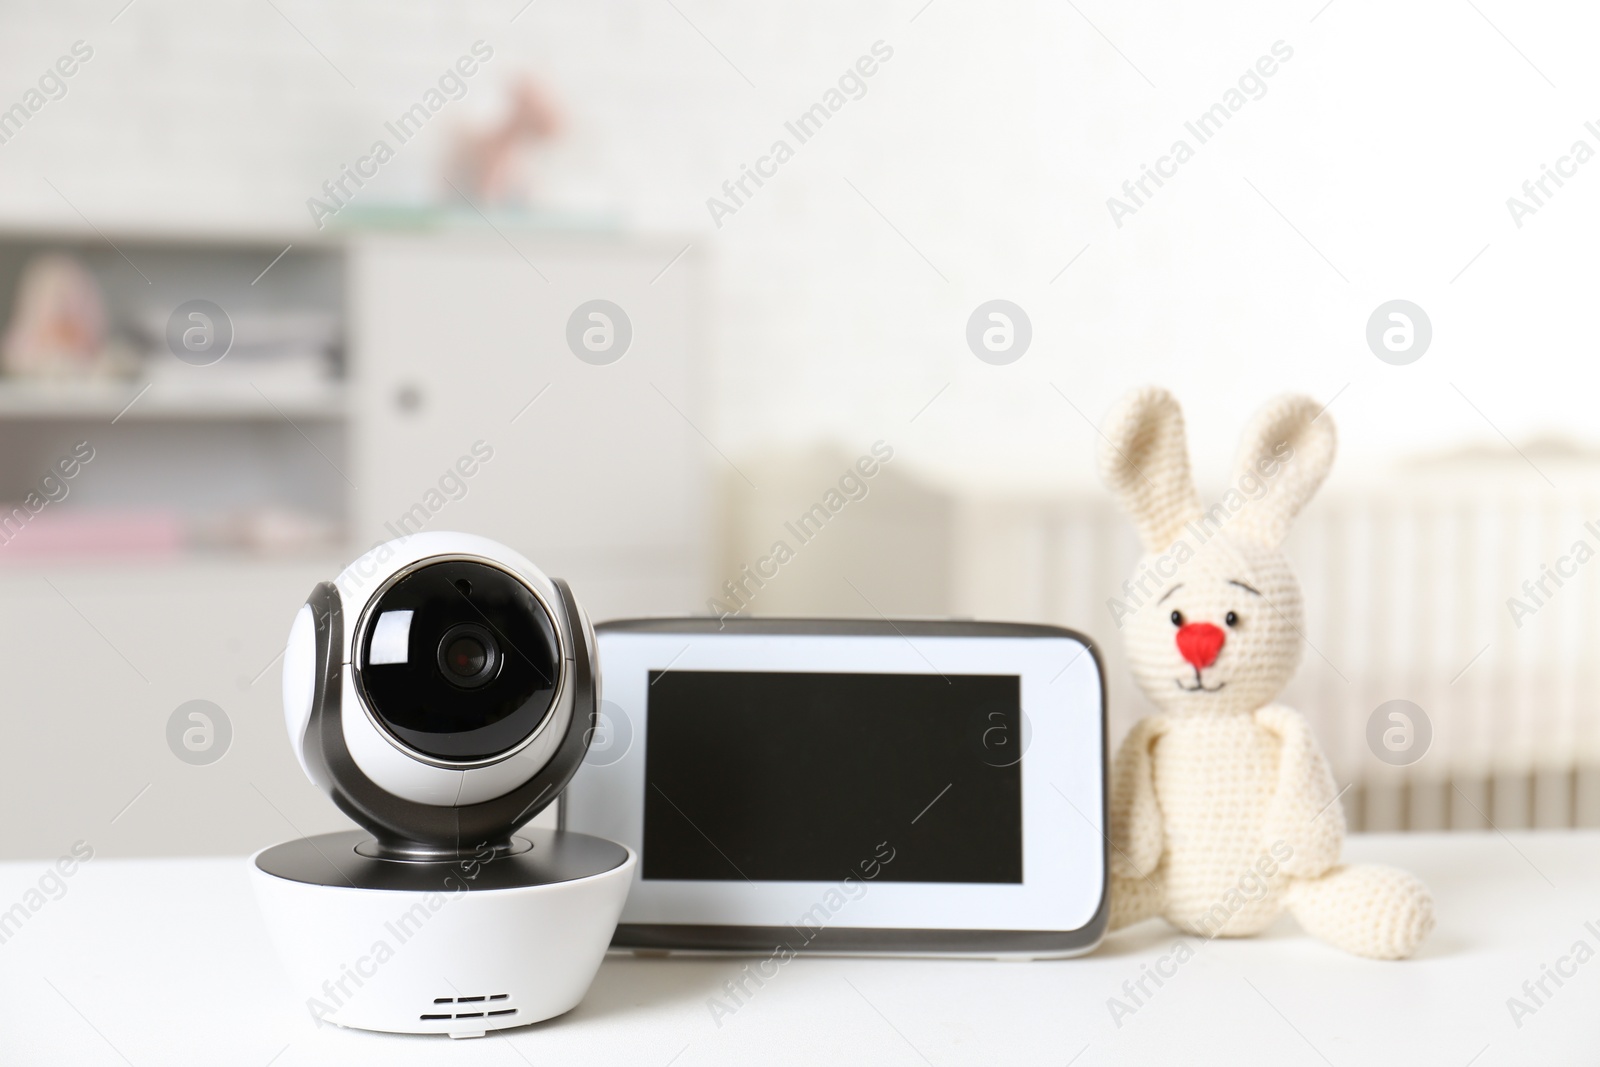 Photo of Baby monitor with camera and toy on table in room. Video nanny